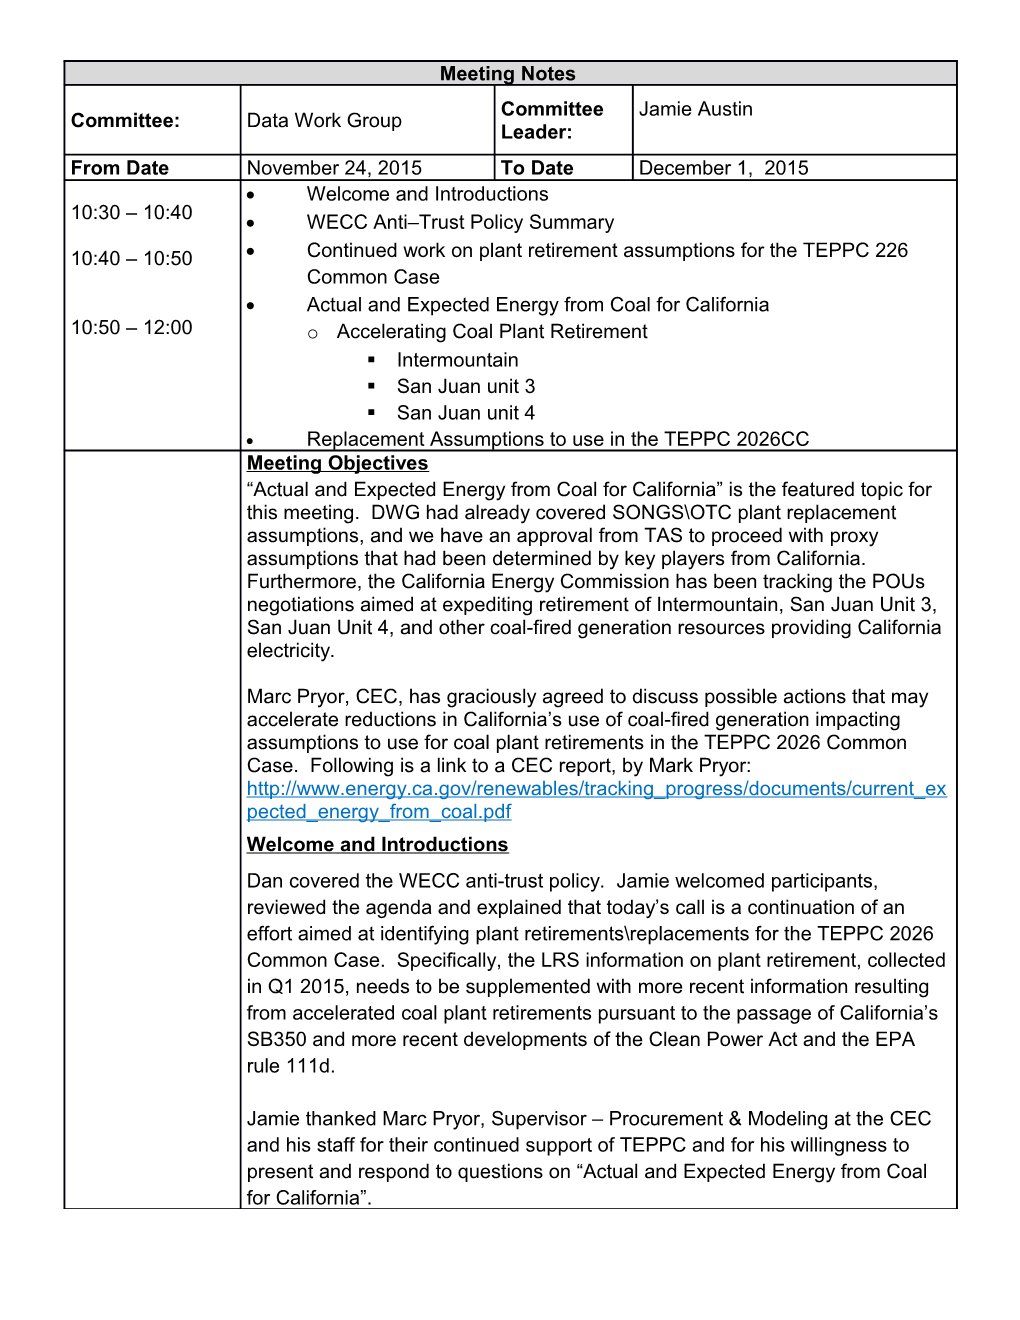 DWG Meeting Notes CA Expected Energy from Coal 120115 V2